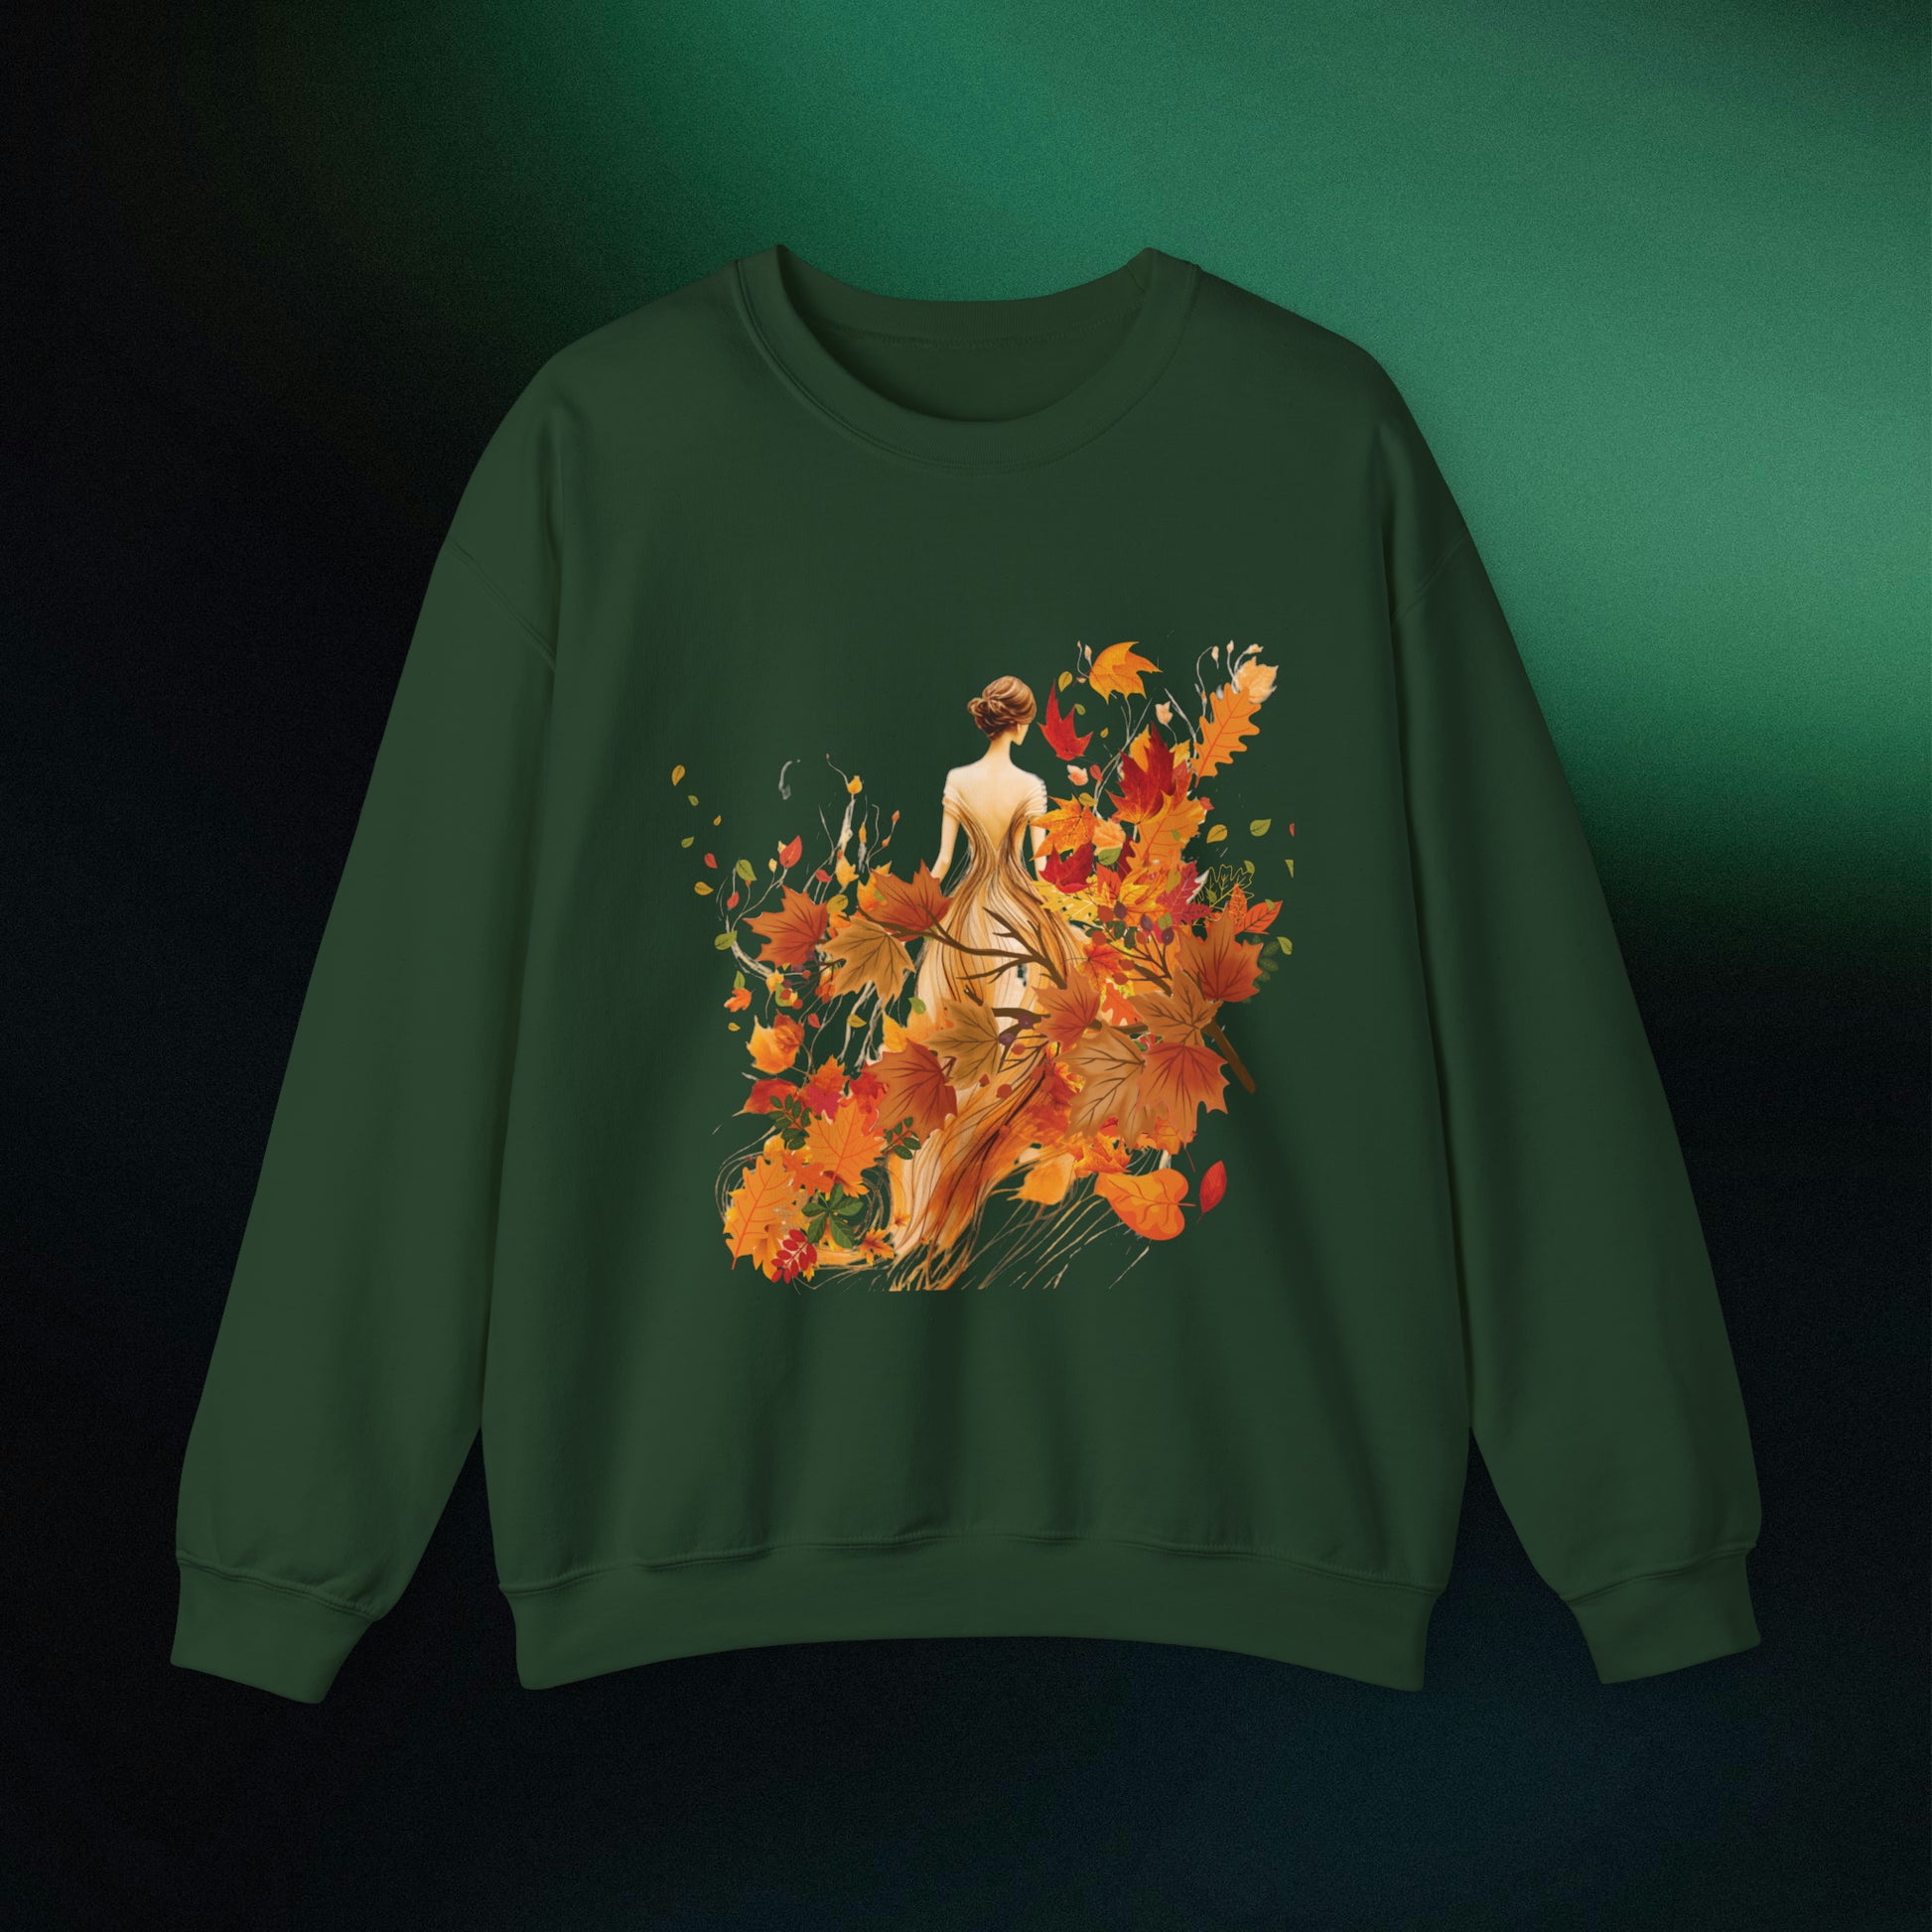 Whimsical Dreams in Autumn Hues: Romantic Dreamy Female Surrounded by Autumn Leaves Sweatshirt Sweatshirt S Forest Green 